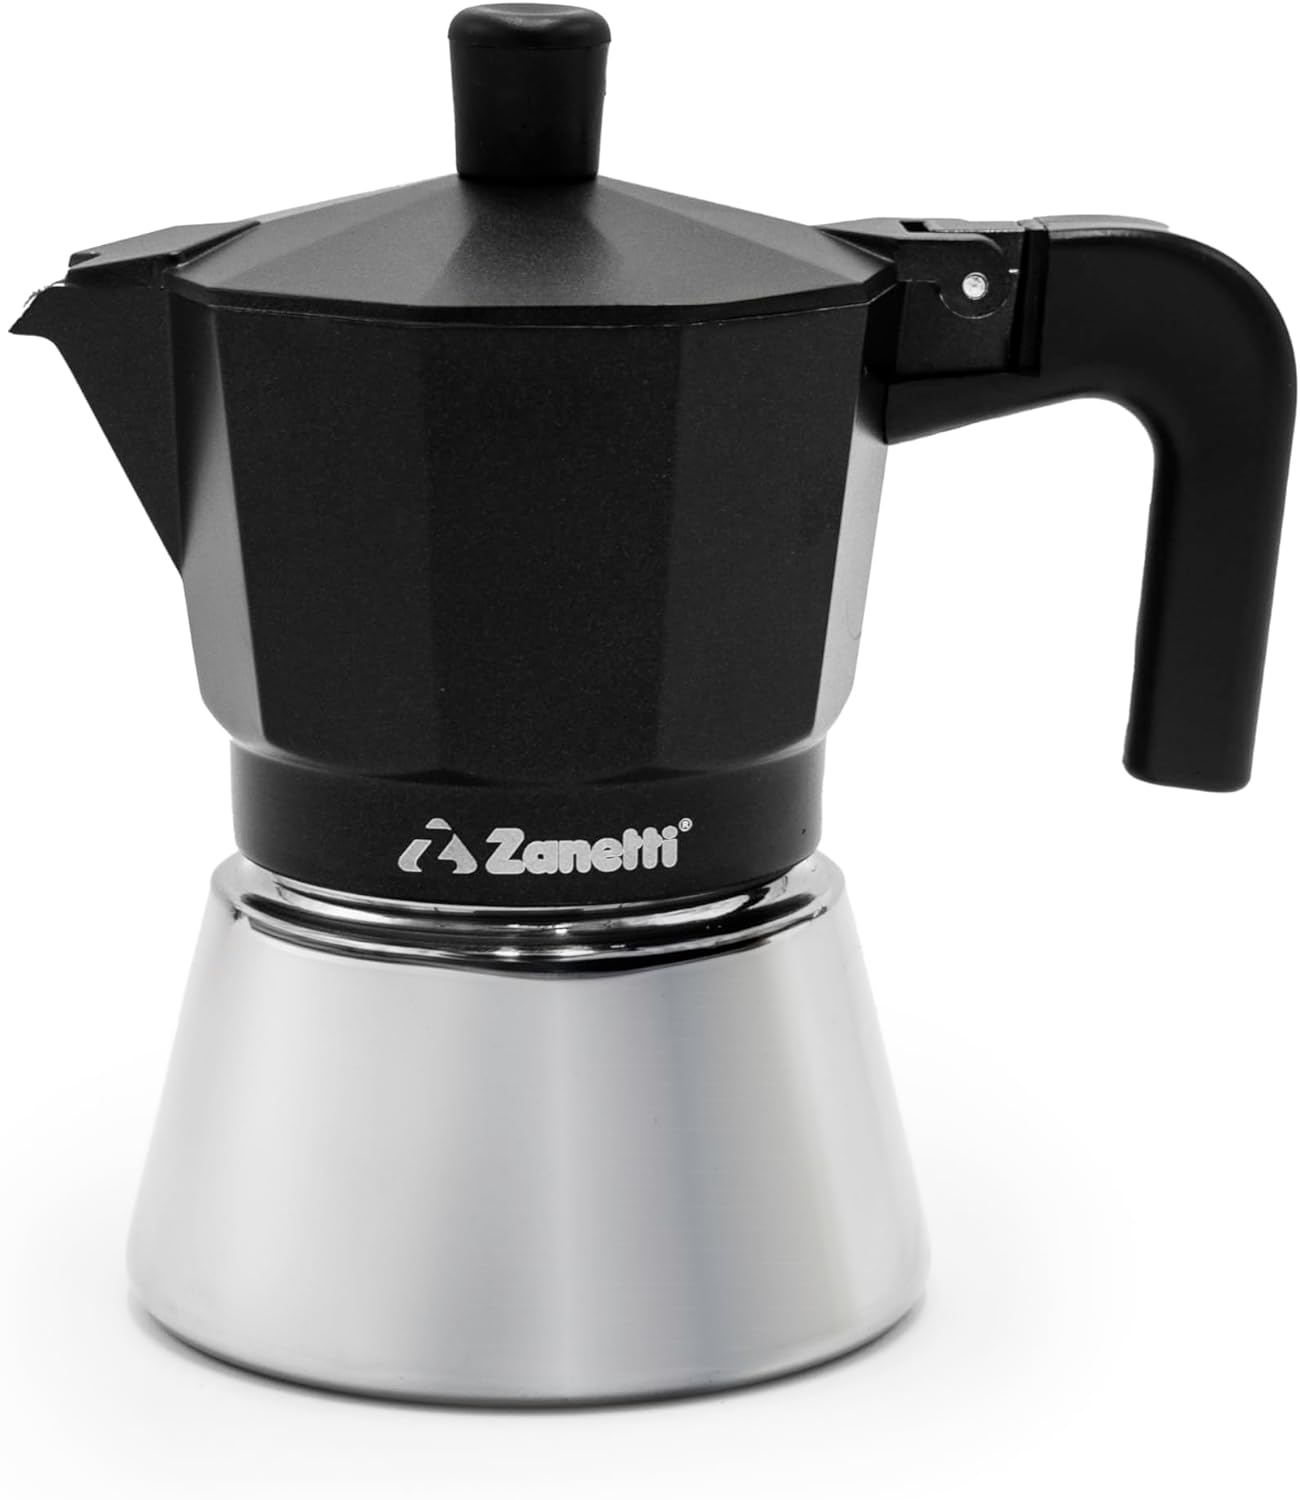 Zanetti, Star Espresso Maker for Induction, 3 Cups, Espresso Maker with Stainless Steel Kettle and Ergonym Handles, Suitable for Induction Cookers, 3 Cups, Color: Black